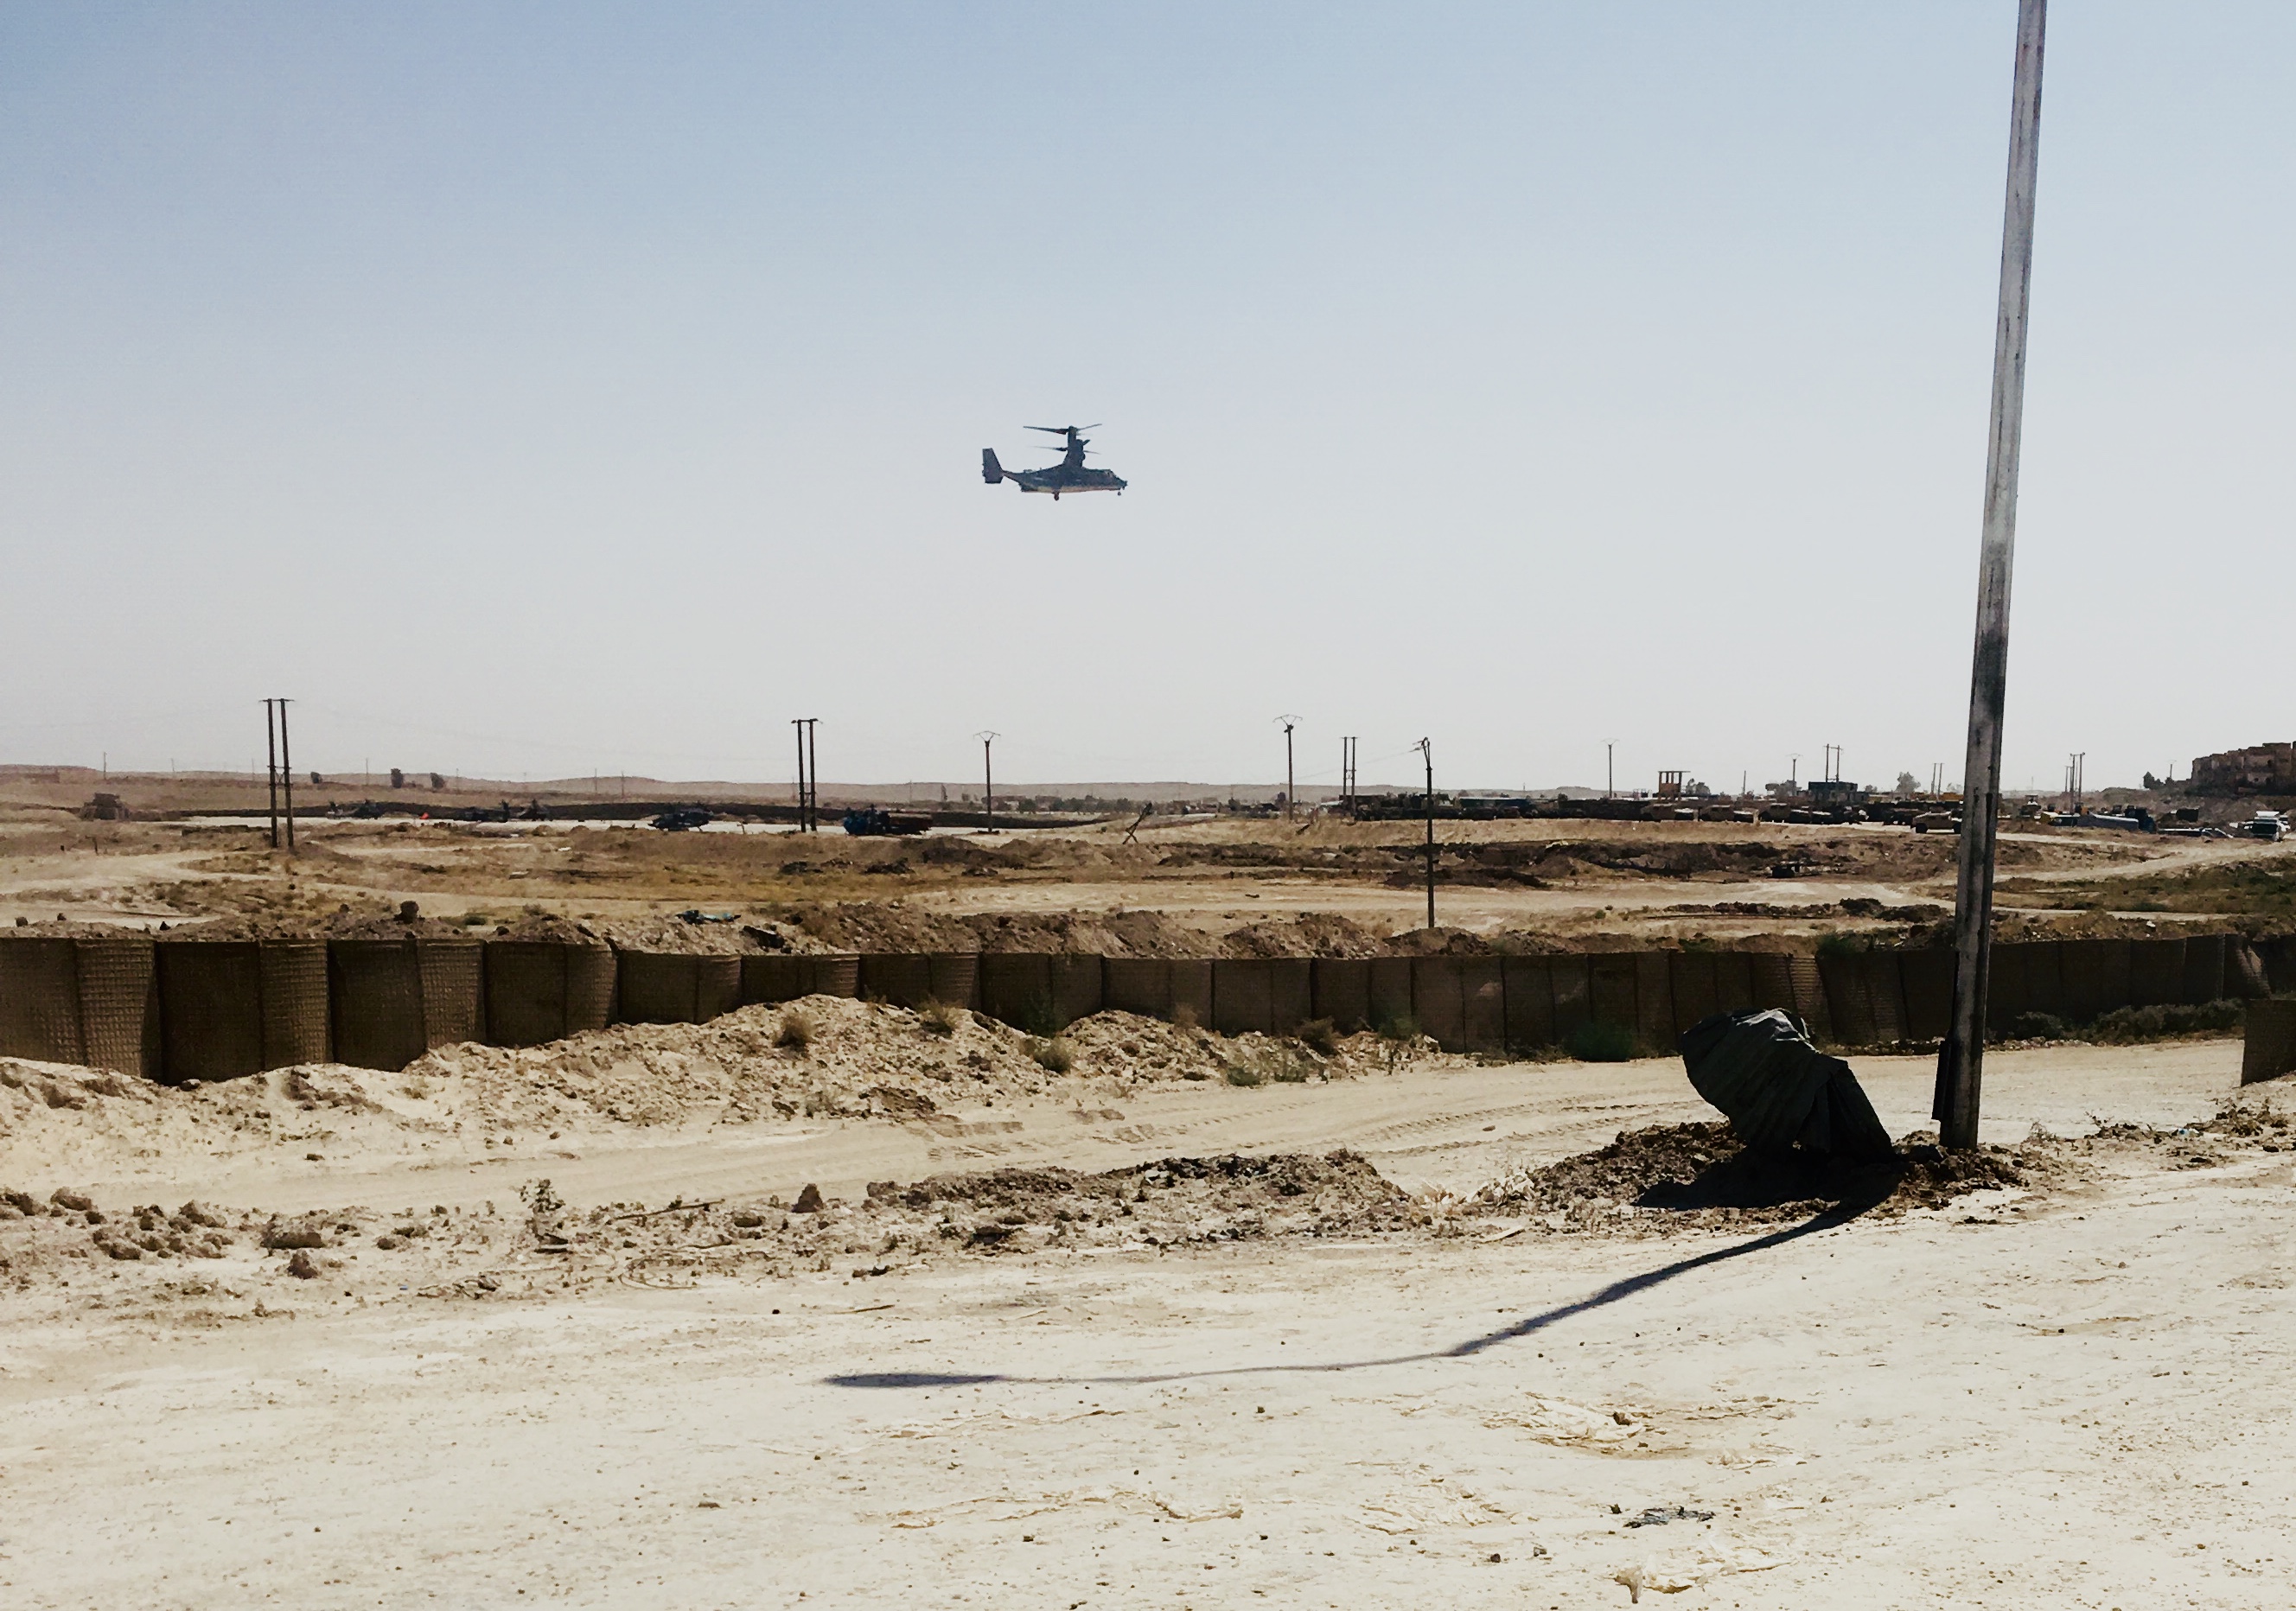 A helicopter landing in the desert.